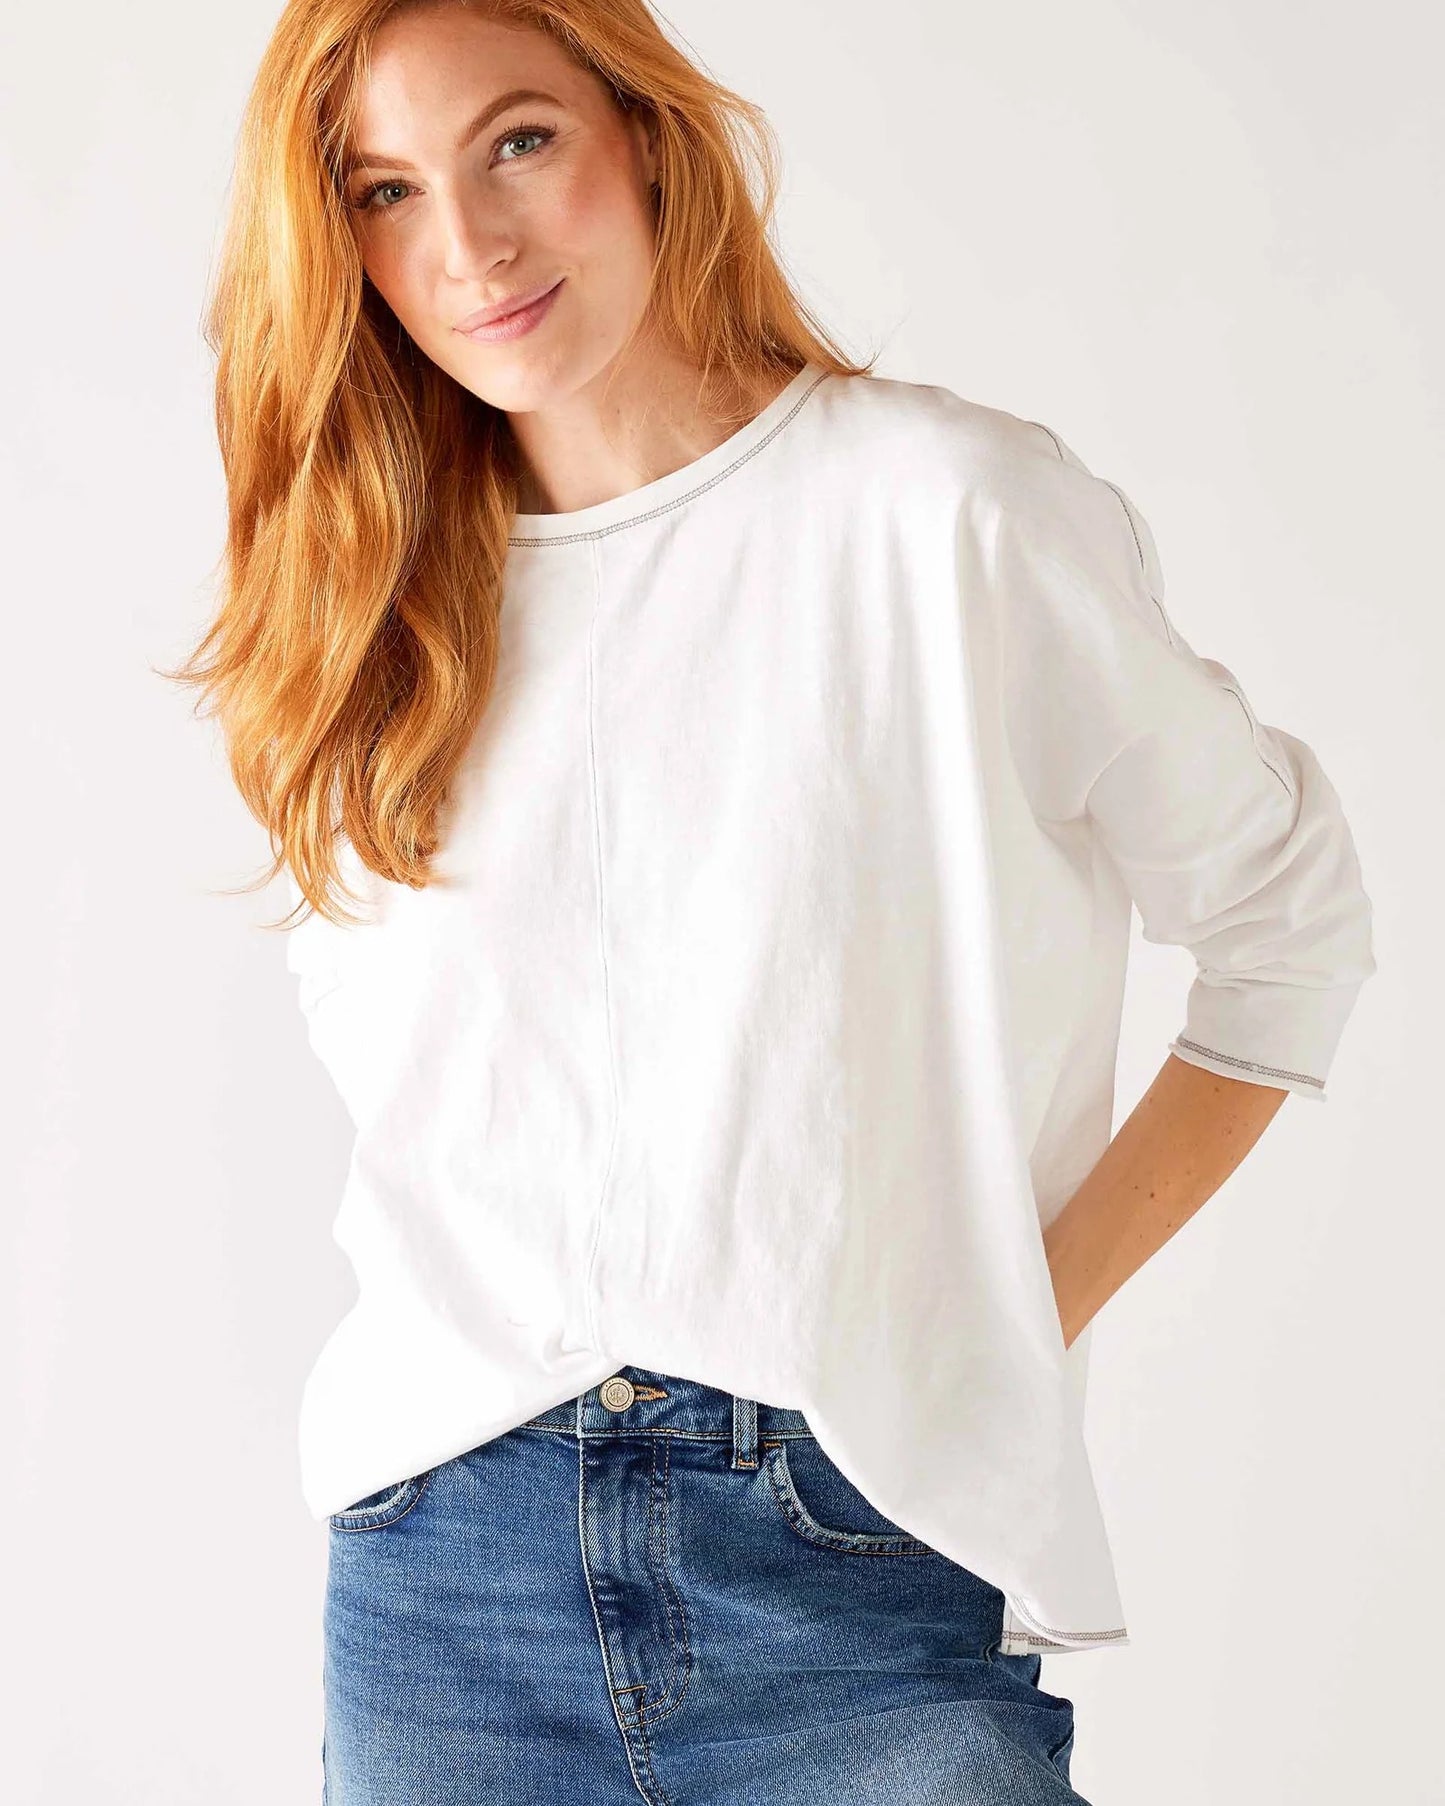 Catalina Stitches Slub Tee in Cloud White by MERSEA